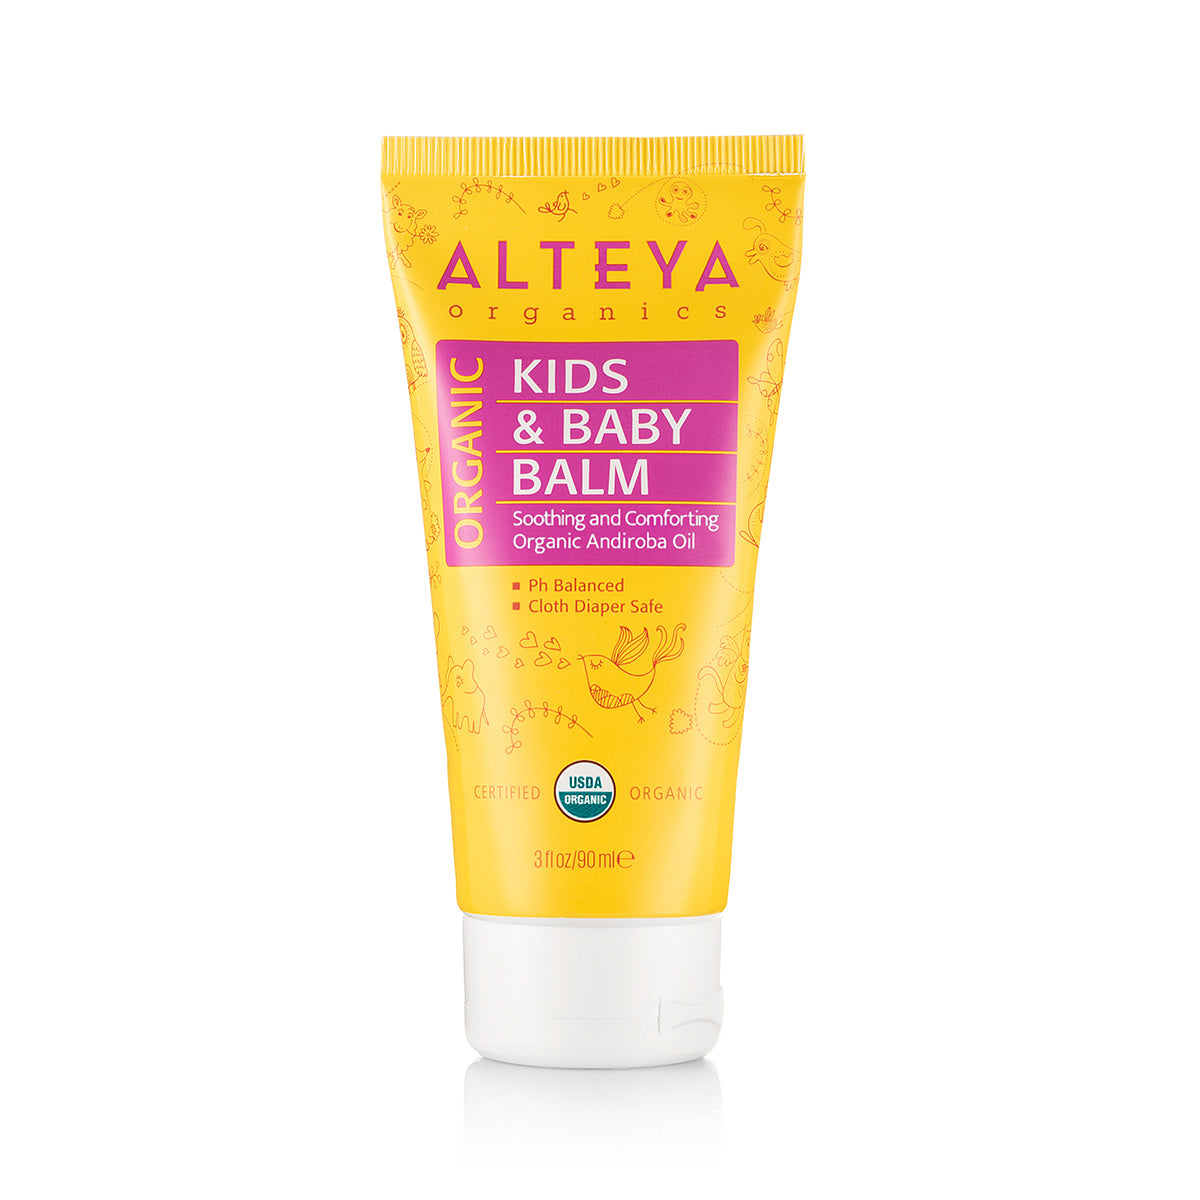 An organic tube of Alteya Organics Kids & Baby Balm designed for sensitive skin. This healing balm provides gentle and soothing care for your little one's delicate skin.